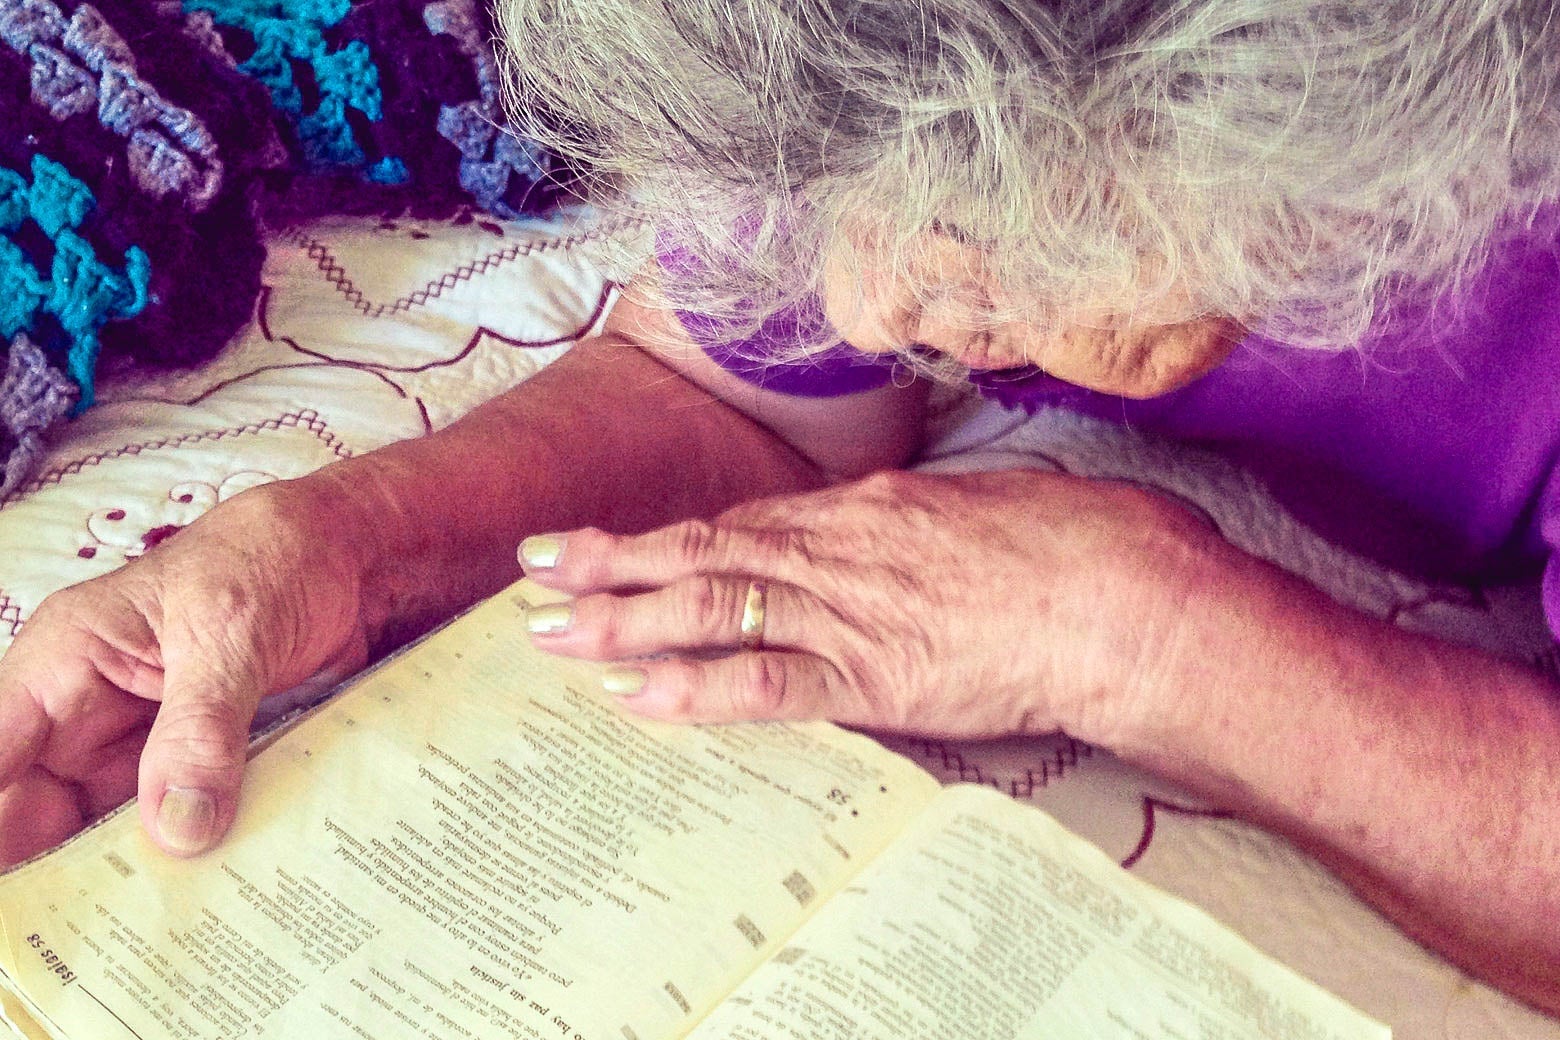 A woman leans over a Bible.